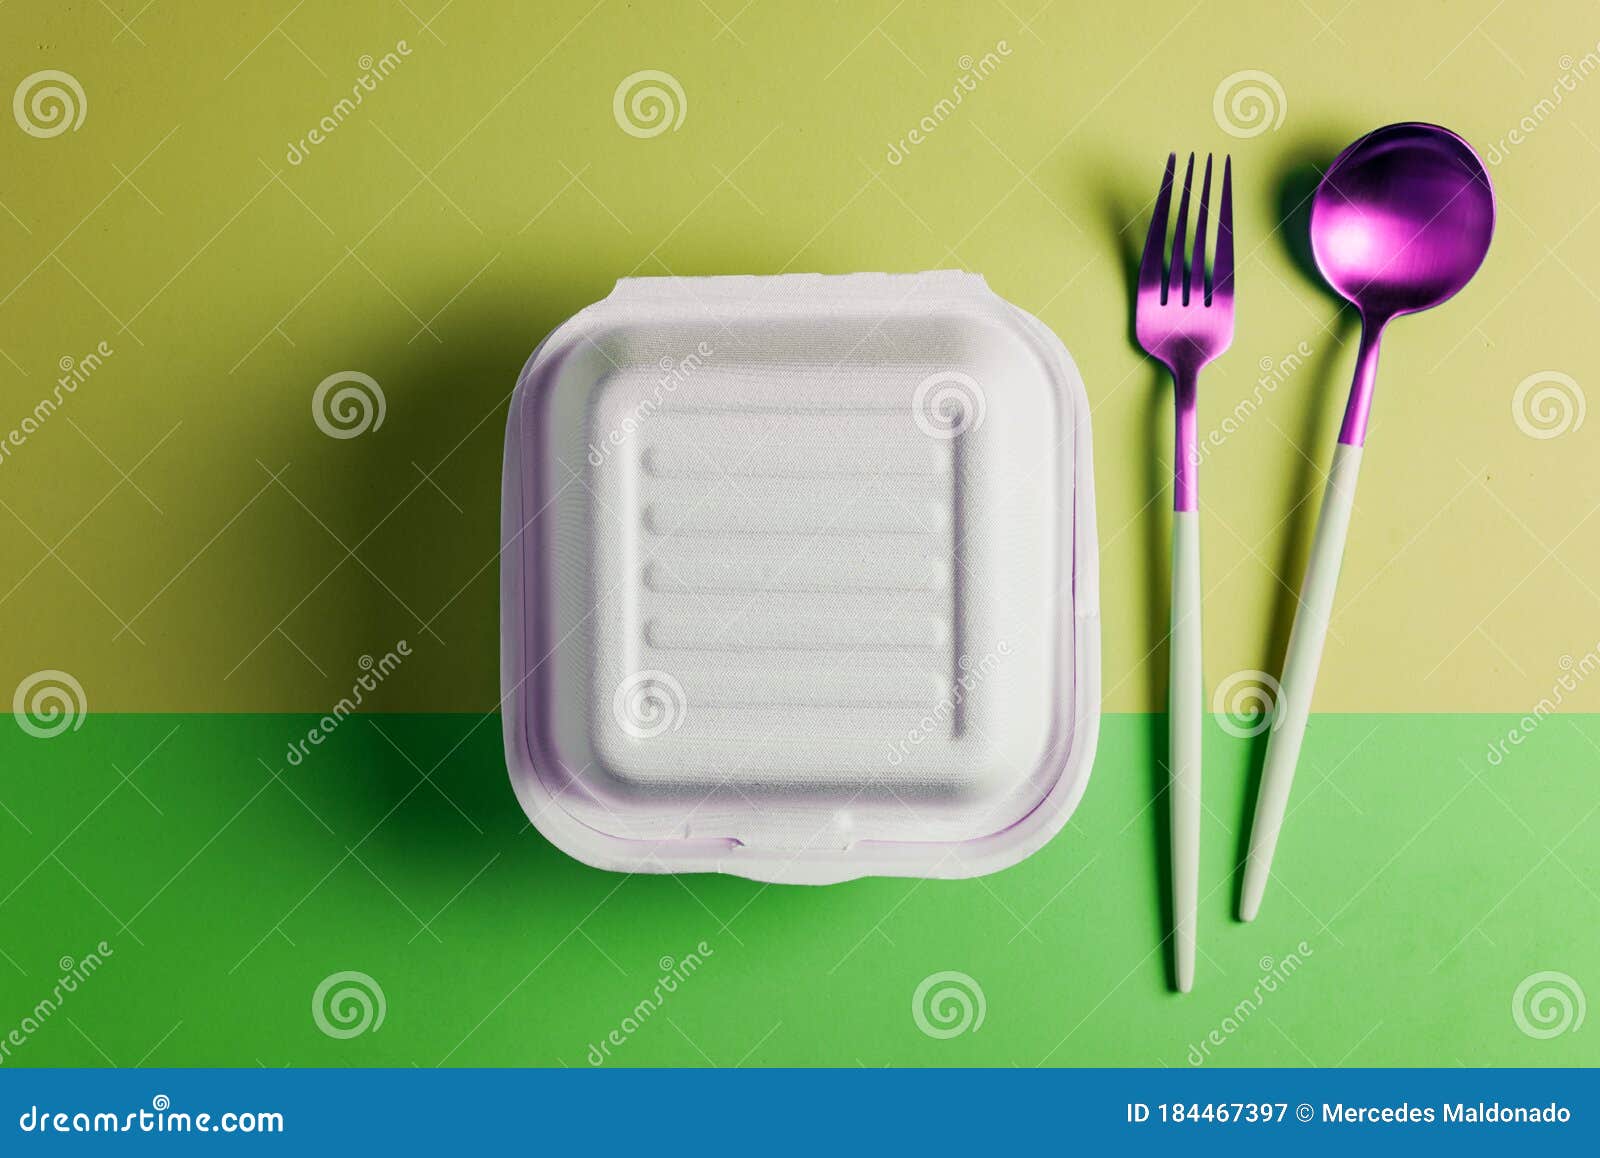 healthy food concept: white burguer packaging closed with retro fork and spoon